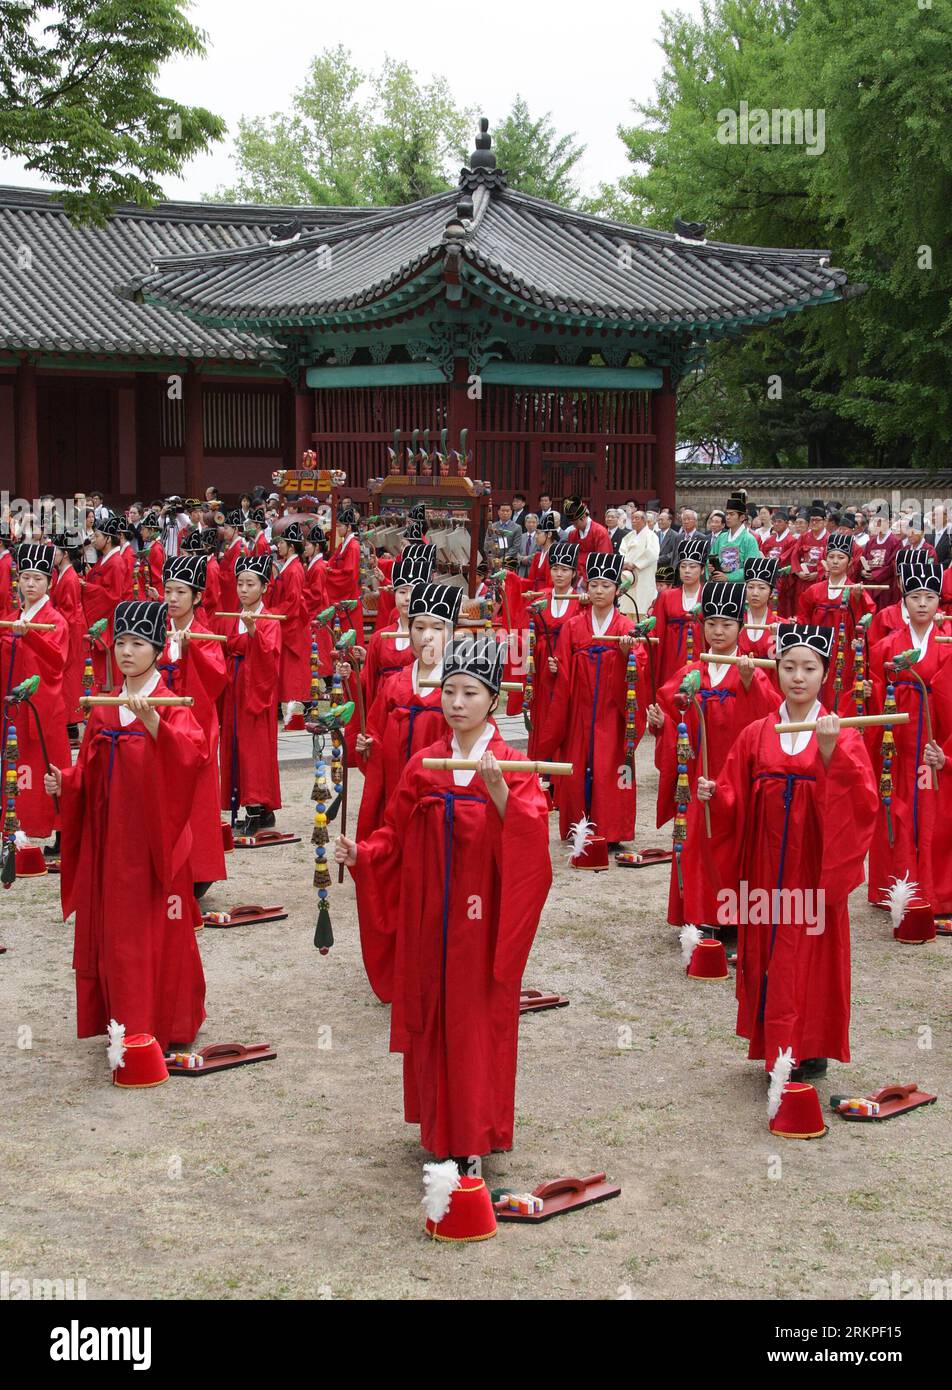 Bildnummer: 57979824  Datum: 11.05.2012  Copyright: imago/Xinhua (120511) -- SEOUL, May 11, 2012 (Xinhua) -- College students wearing traditional costumes perform traditional ritual at a Confucian shrine in Seoul, South Korea, May 11, 2012. The Confucius ritual is staged twice a year at the Confucian Shrine at Sungkyunkwan University in Seoul, which was built during the Joseon Dynasty in 1398 for Korean Confucian scholars to honor Confucius. (Xinhua/Park Jin-hee) SOUTH KOREA-SEOUL-CONFUCIUS RITUAL PUBLICATIONxNOTxINxCHN Gesellschaft xda x2x 2012 hoch o0 Konfuzianismus Tradition Bildung Uni Stu Stock Photo